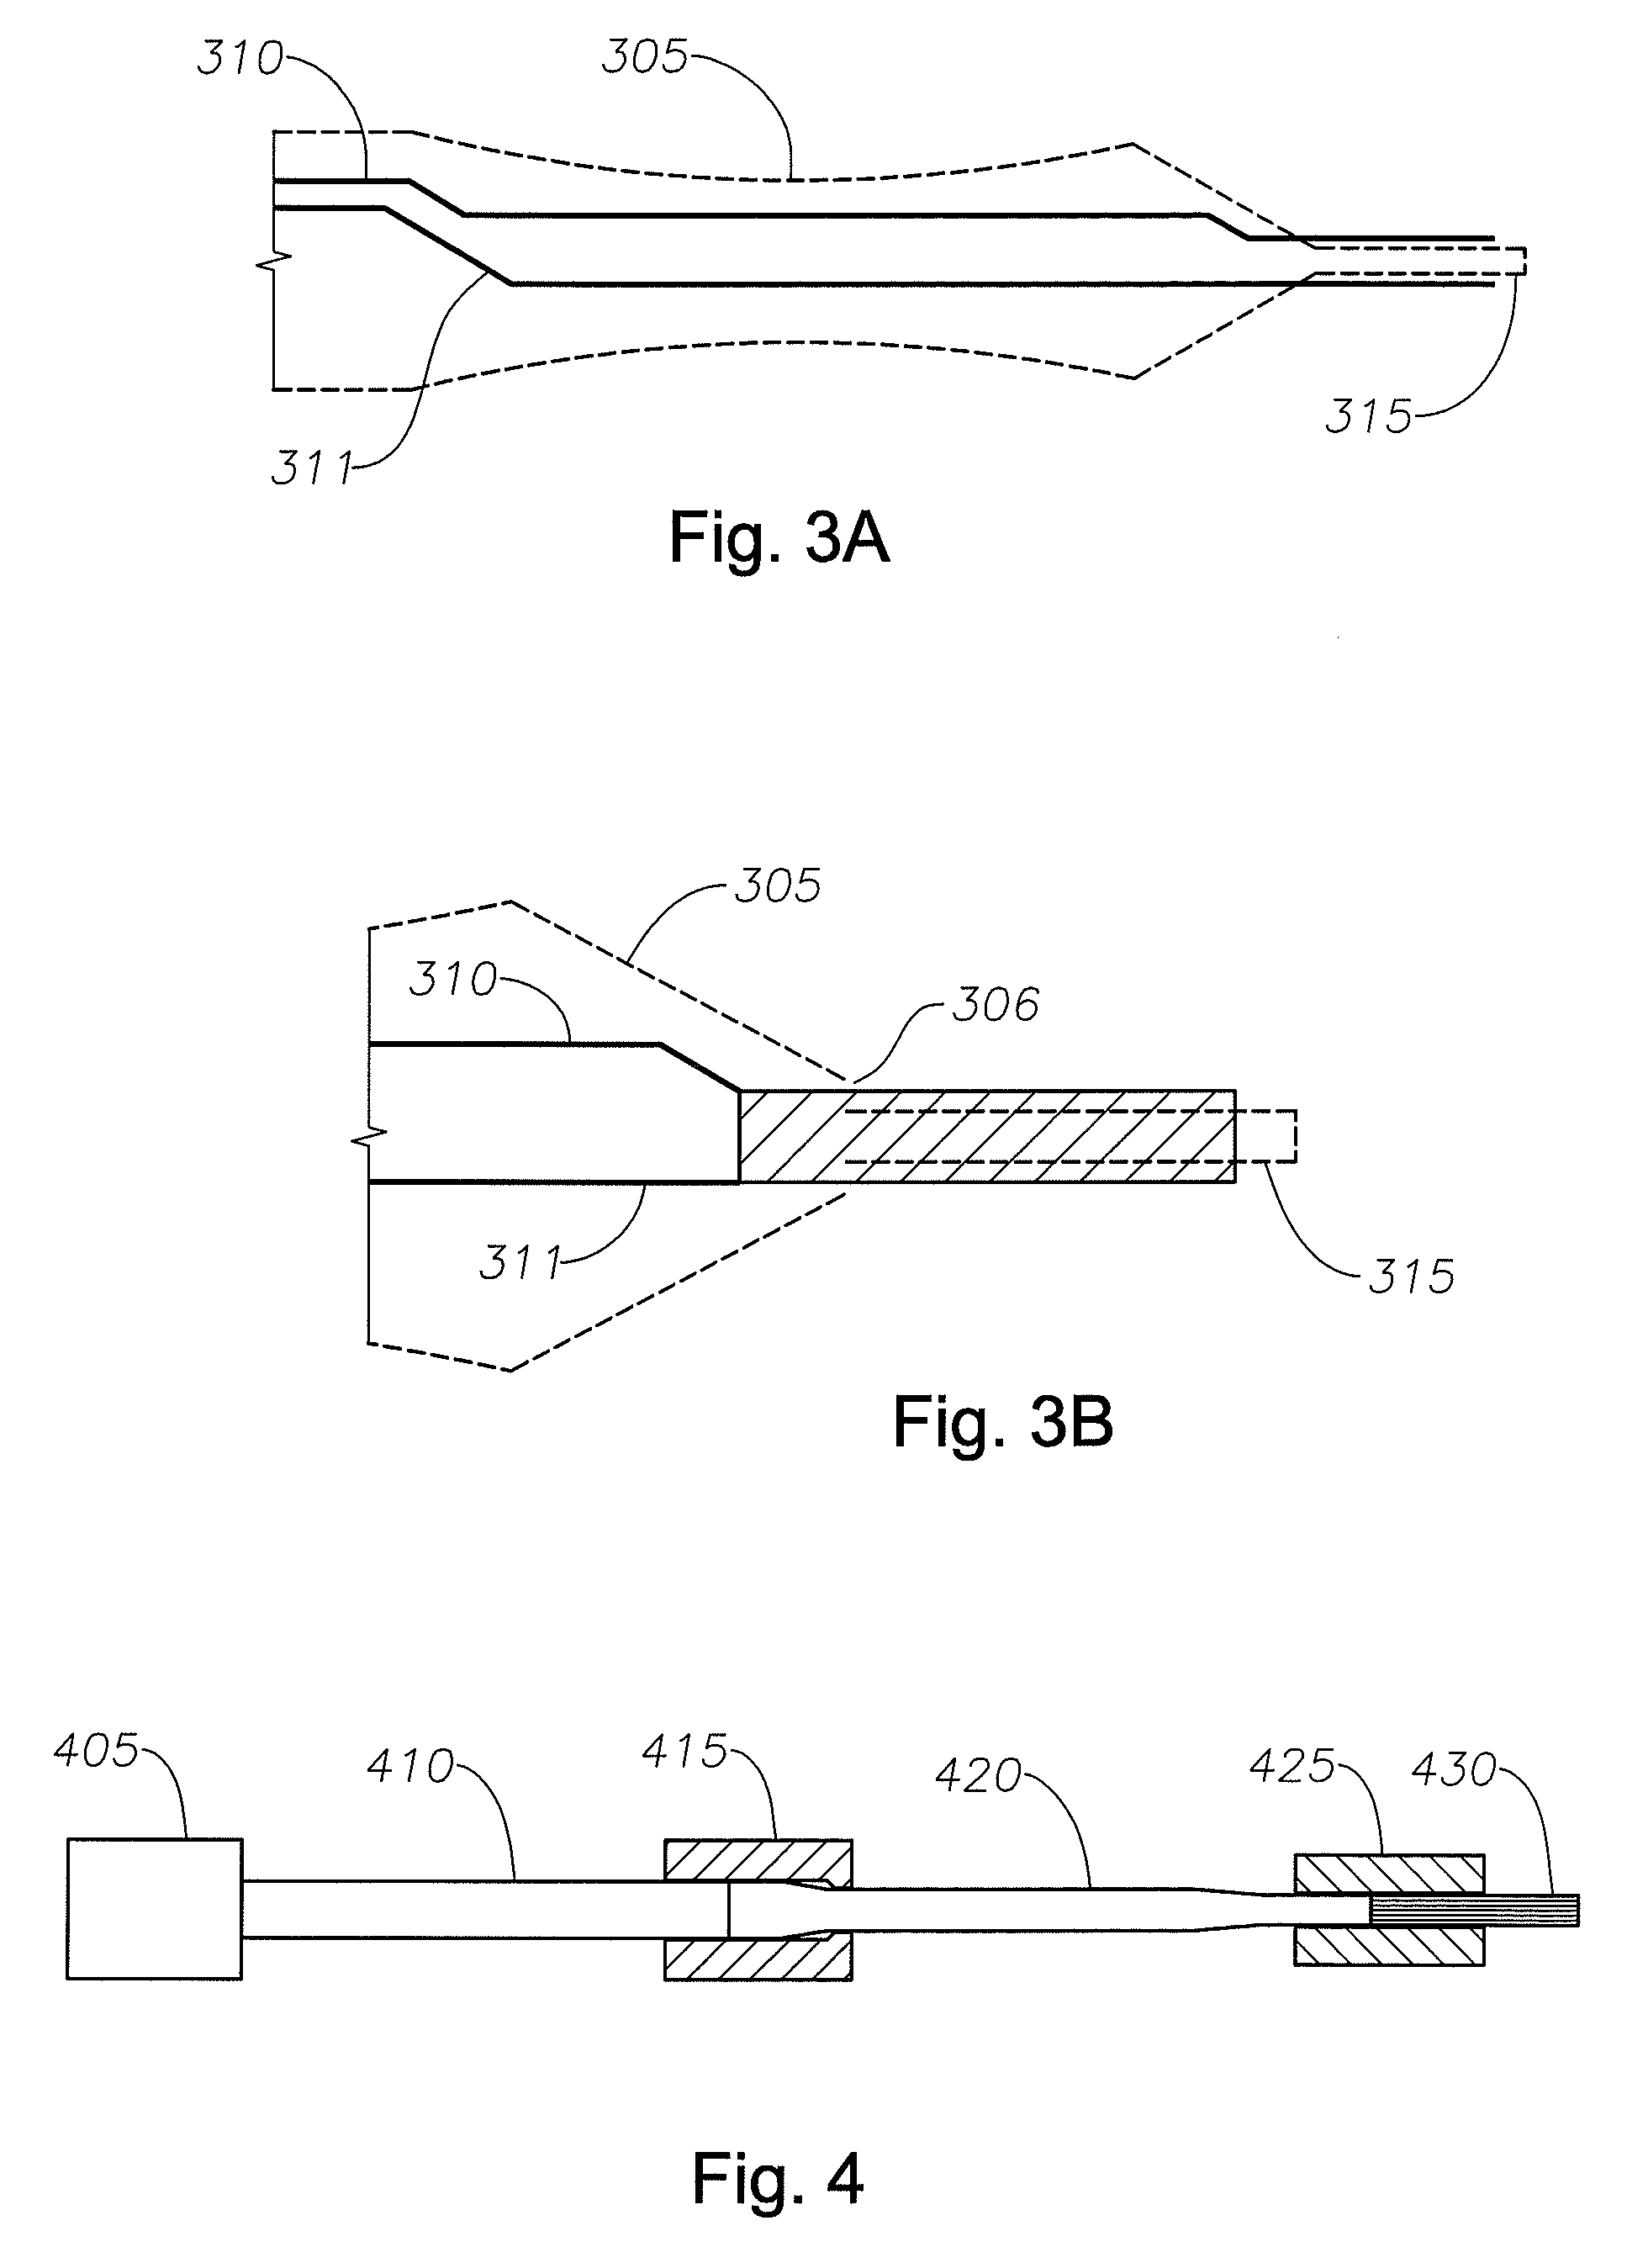 Dual-mode illumination for surgical instrument